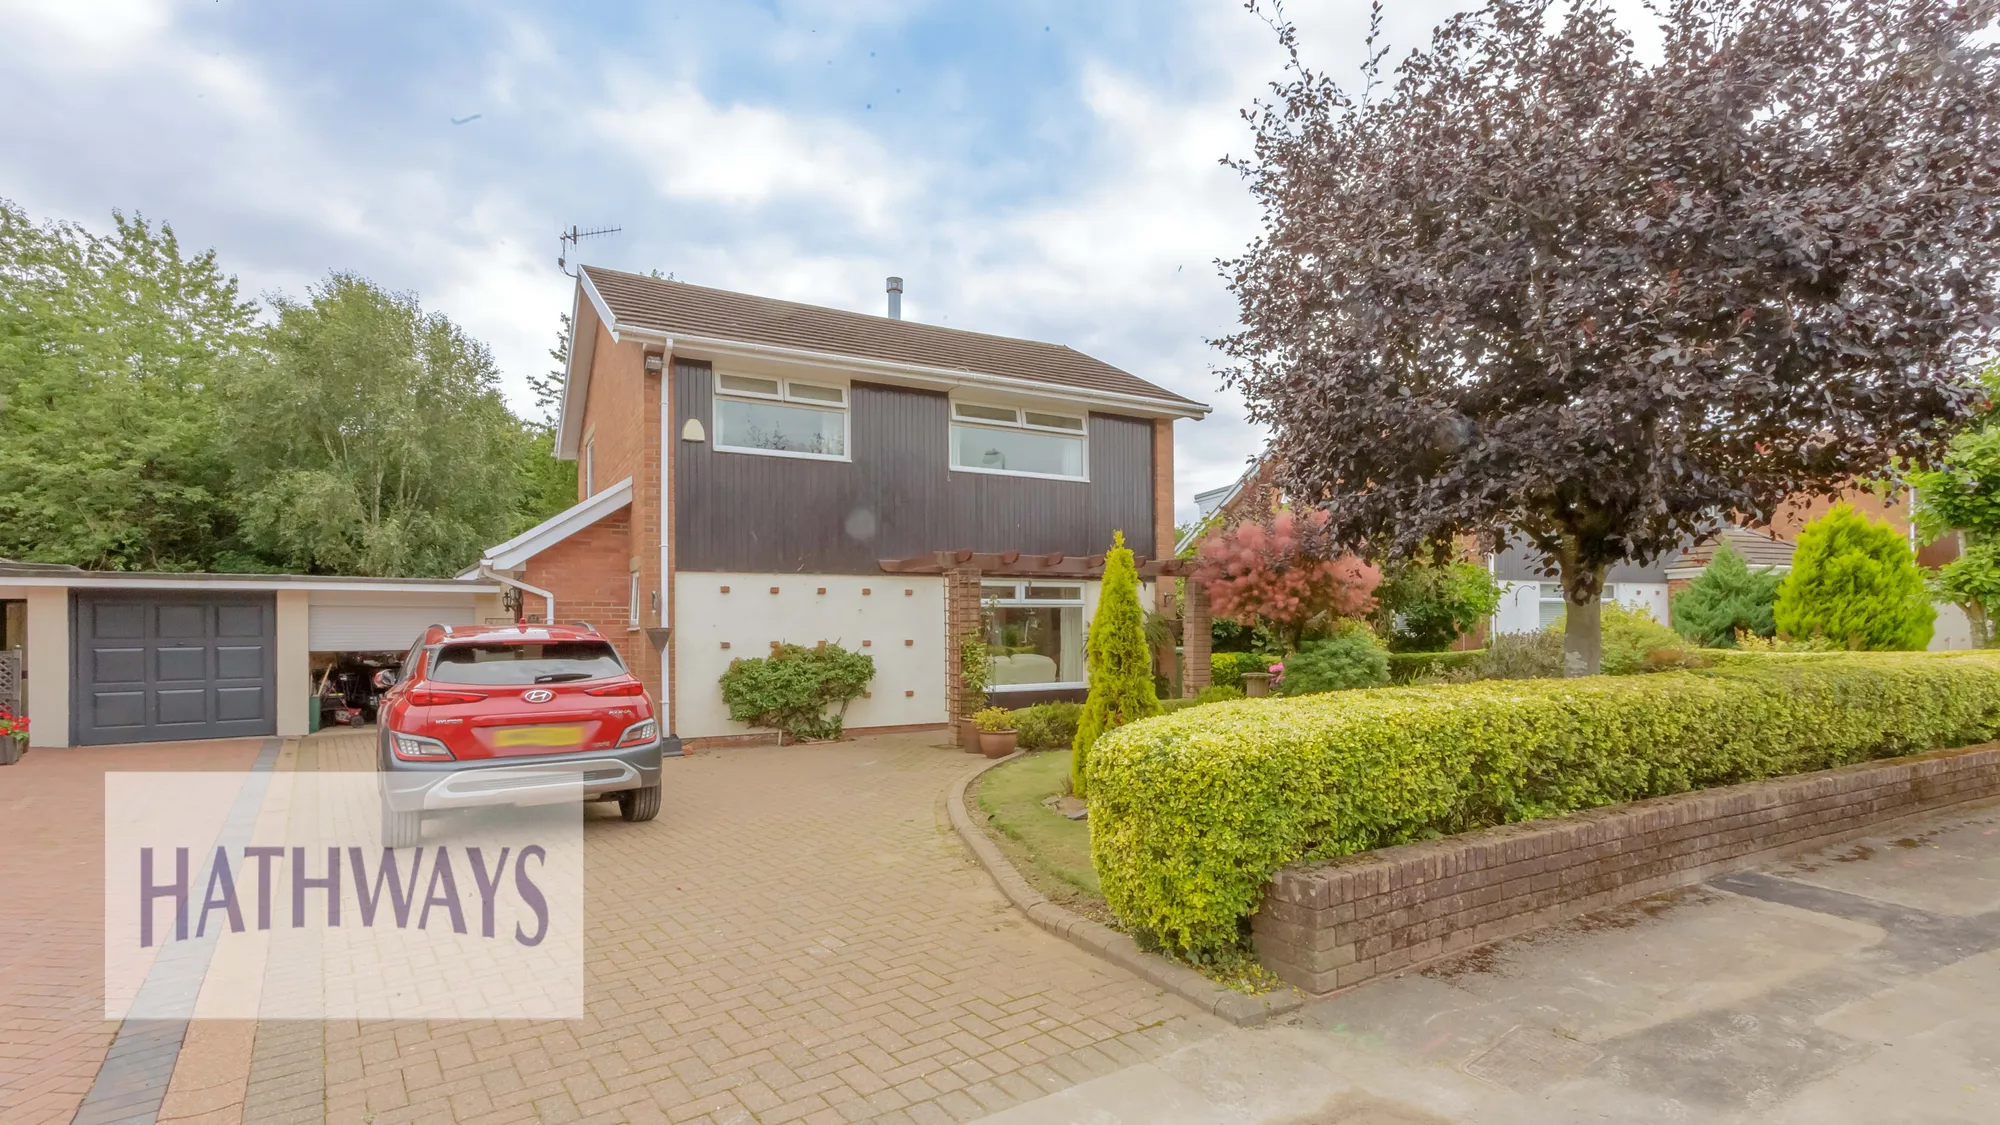 3 bed detached house for sale in The Alders, Cwmbran - Property Image 1